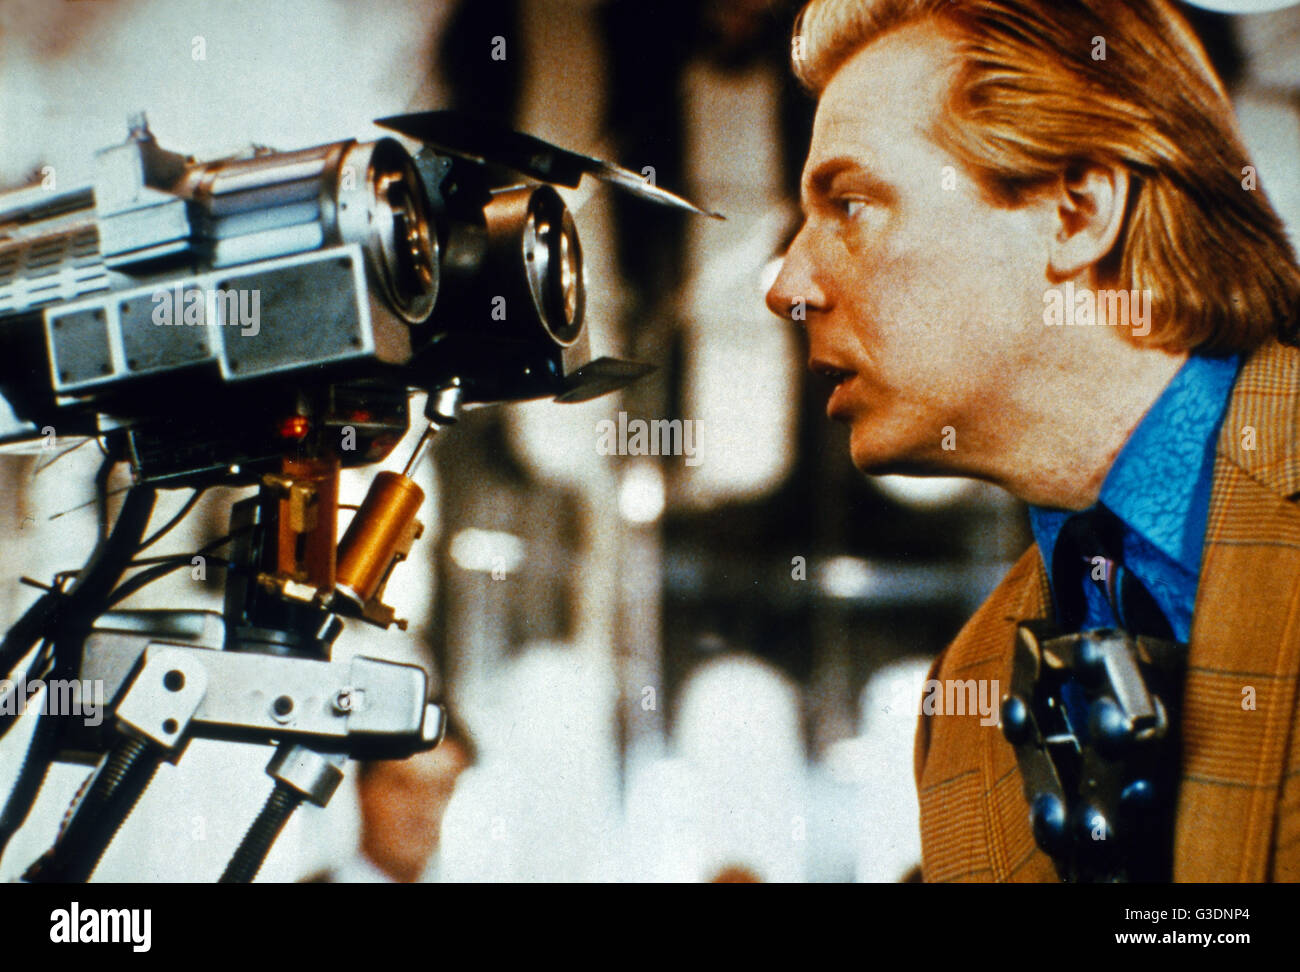 How we made Short Circuit, by Steve Guttenberg and John Badham, Movies